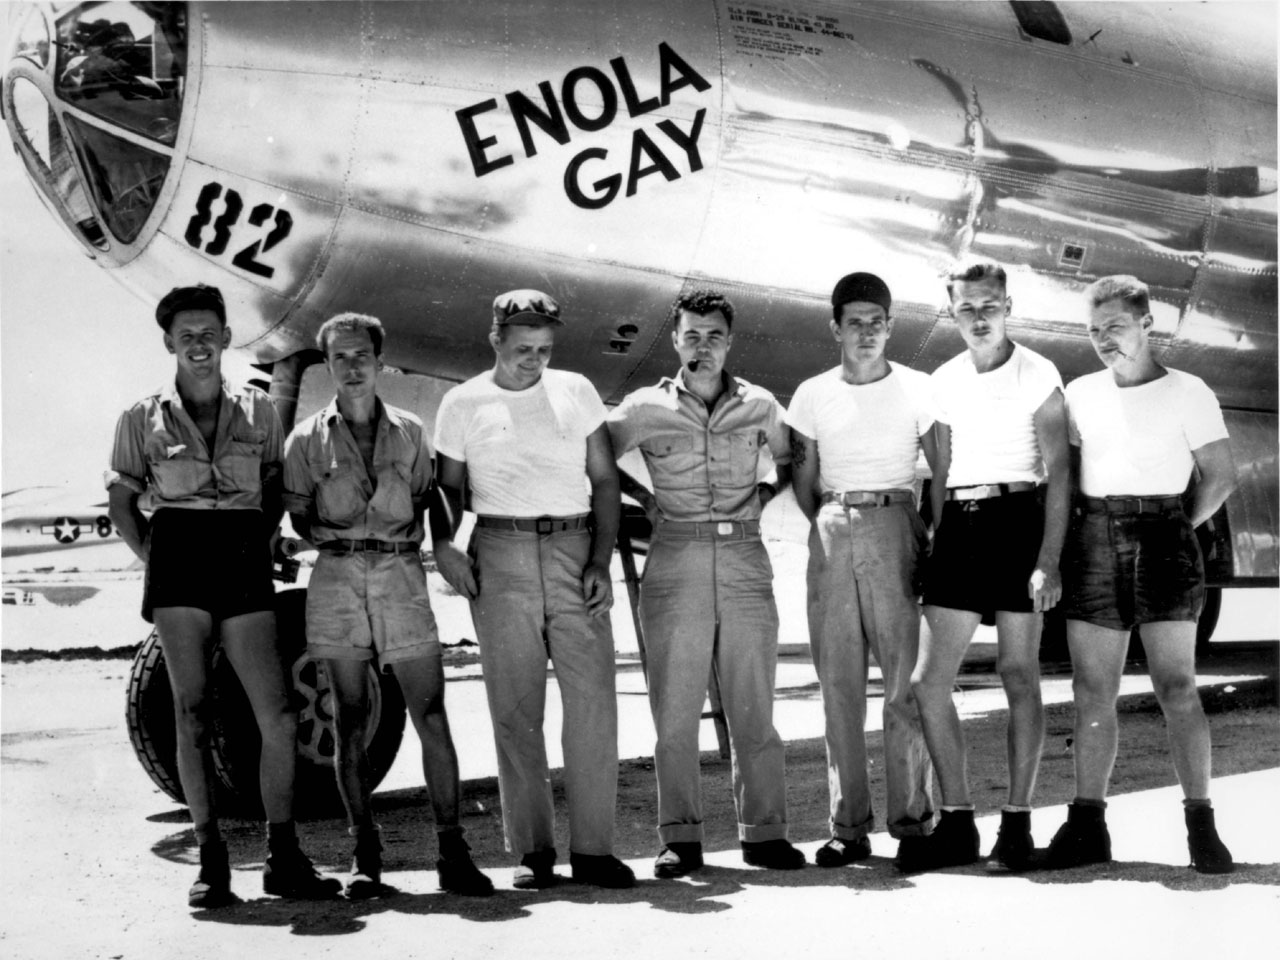 The crew of the Enloa Gay, who dropped the first atomic bomb on Hiroshima in 1945.